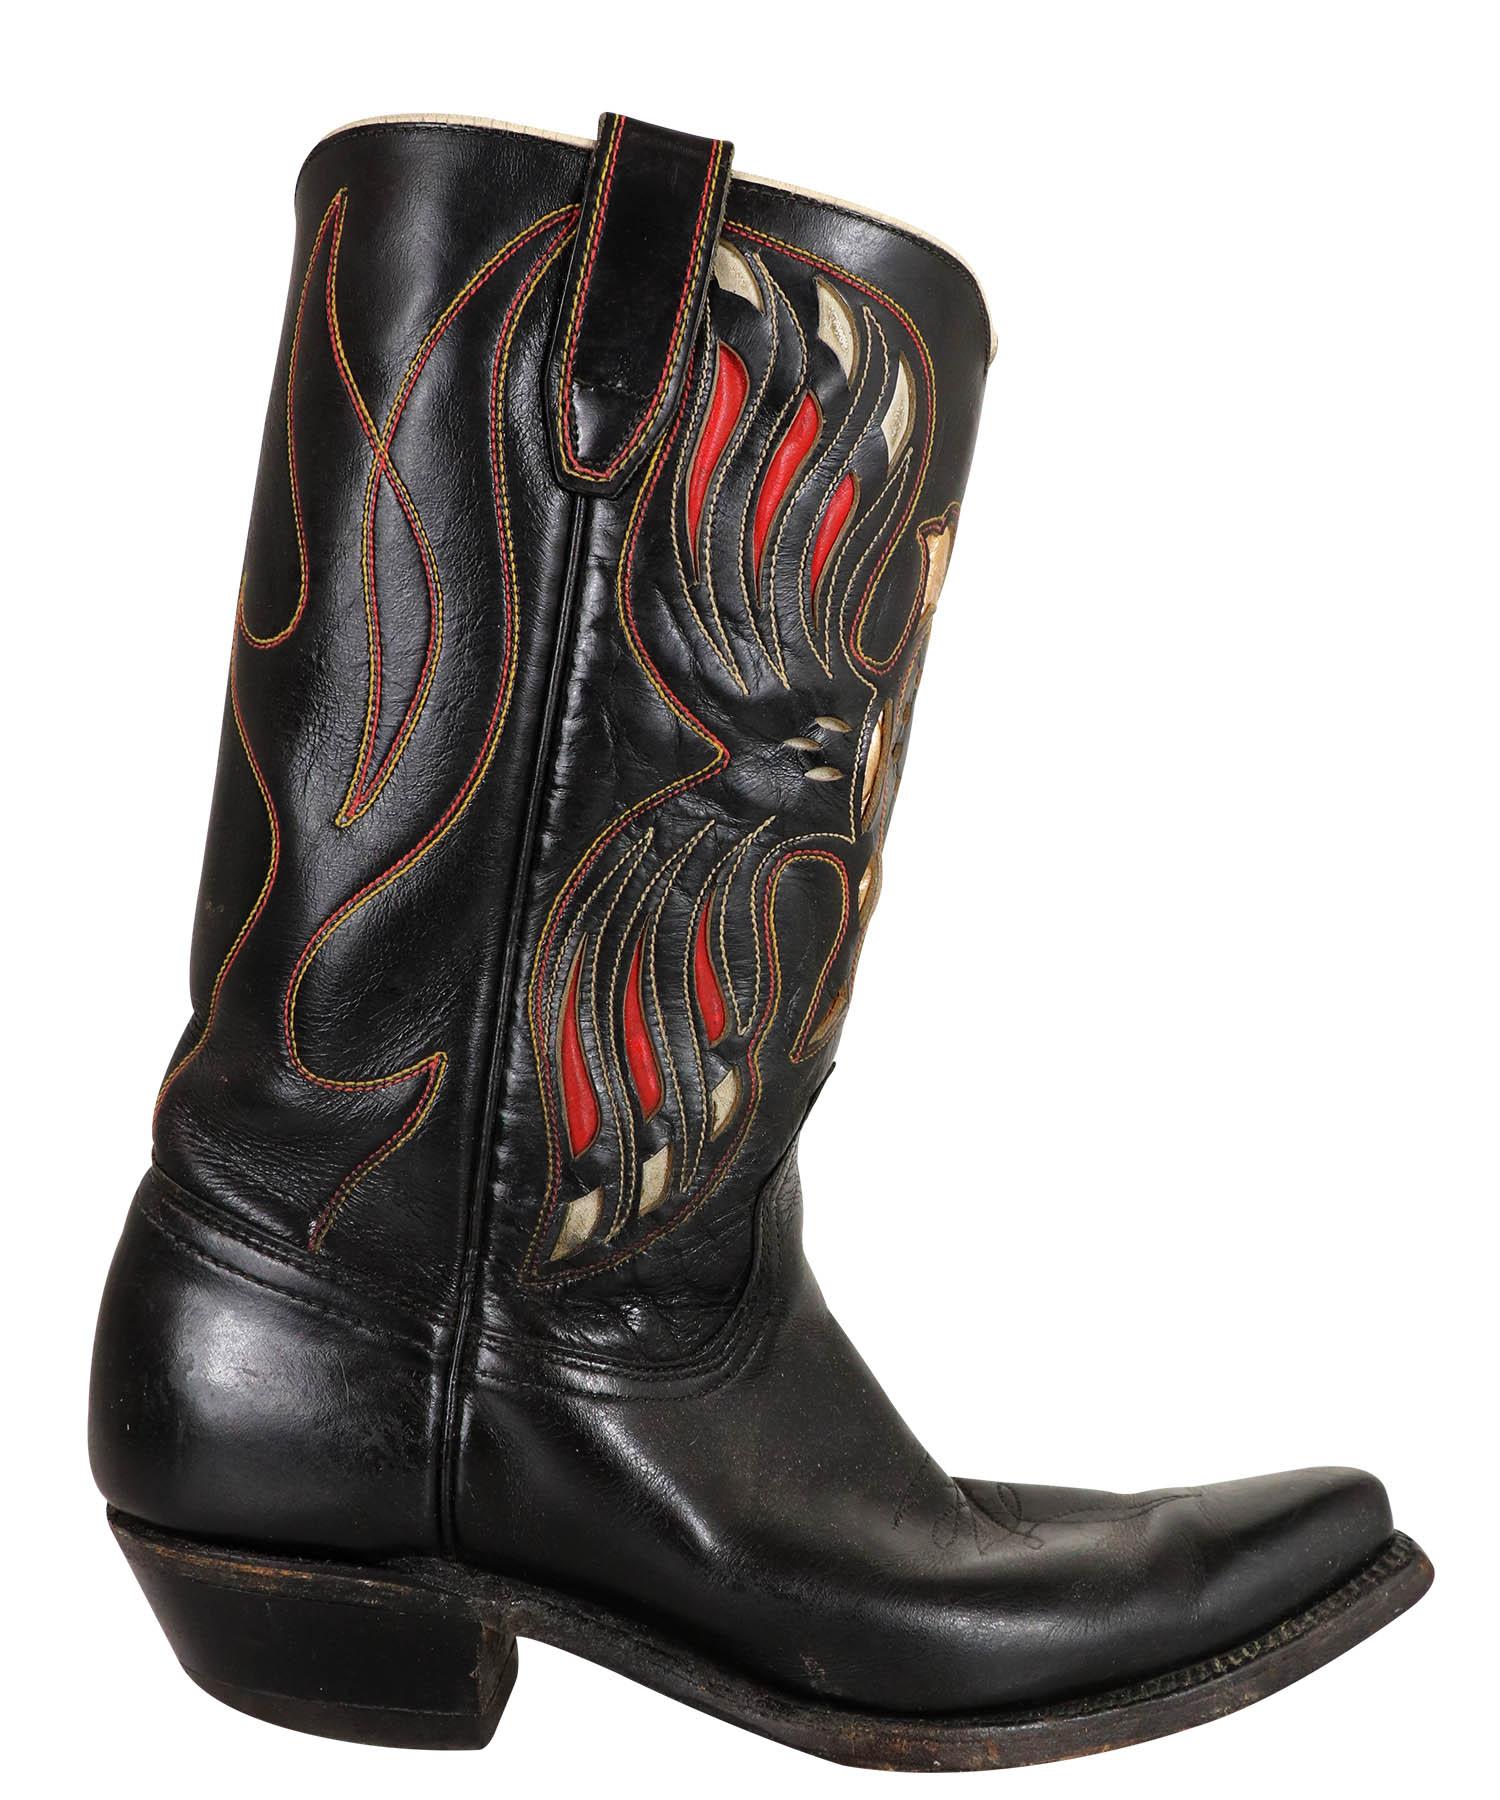 Acme vintage 1950's cowboy boots in black leather with a classic cutout eagle inlay design in red, gold and cream. Boots feature chisel toe with a slight square at toe and sole and cowboy heel. Marked size 7B, Not sure if this is men’s or women’s..